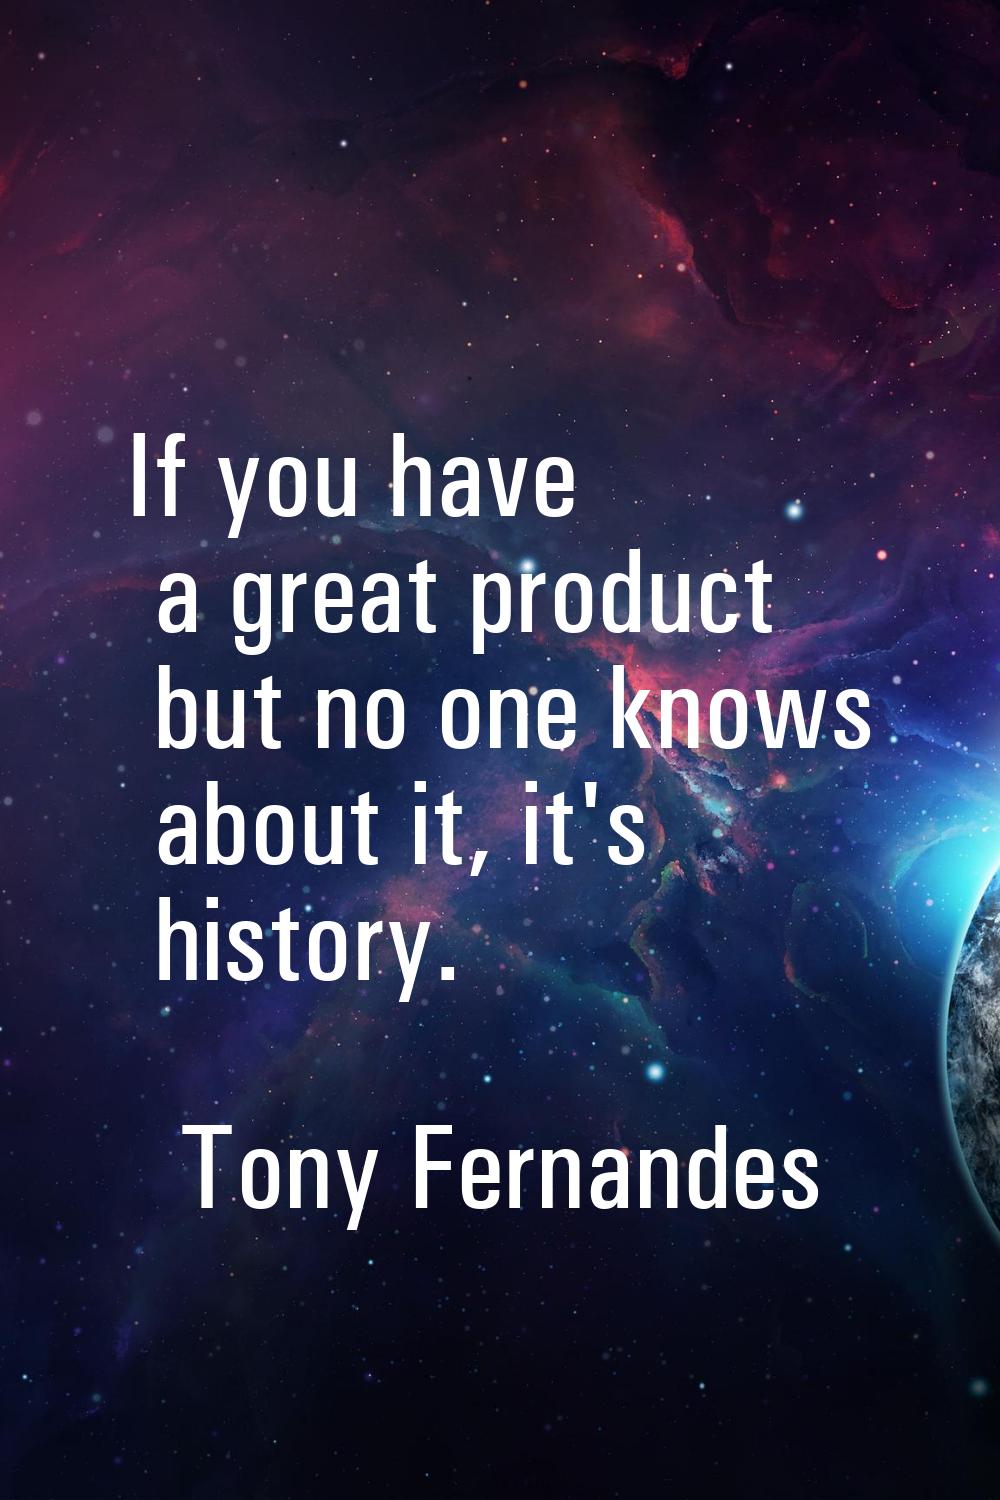 If you have a great product but no one knows about it, it's history.